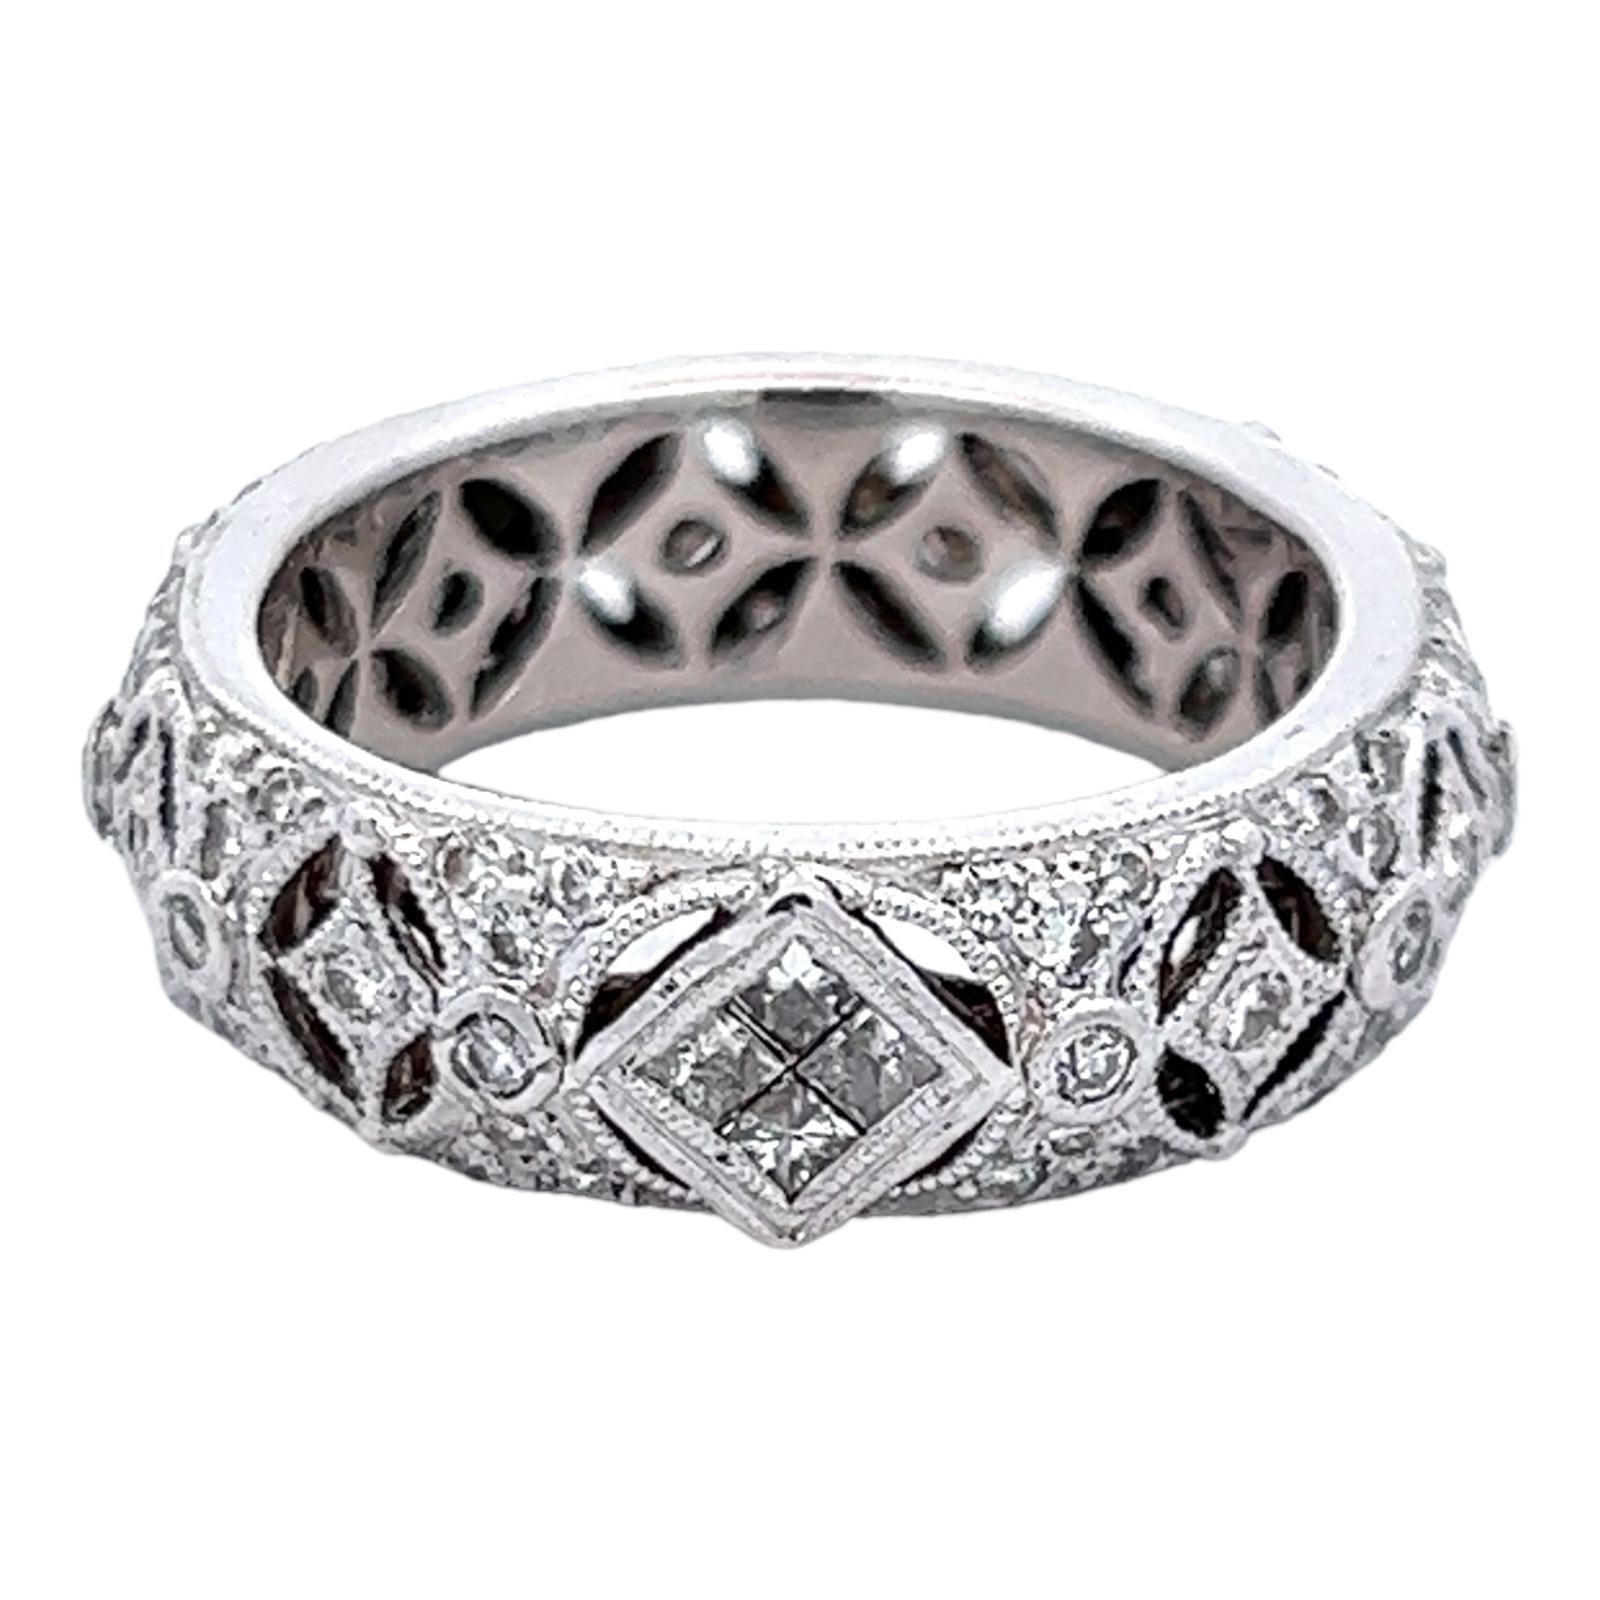 Diamond Filigree 18 Karat White Gold Eternity Wedding Band Ring Size 6  In Excellent Condition For Sale In Boca Raton, FL